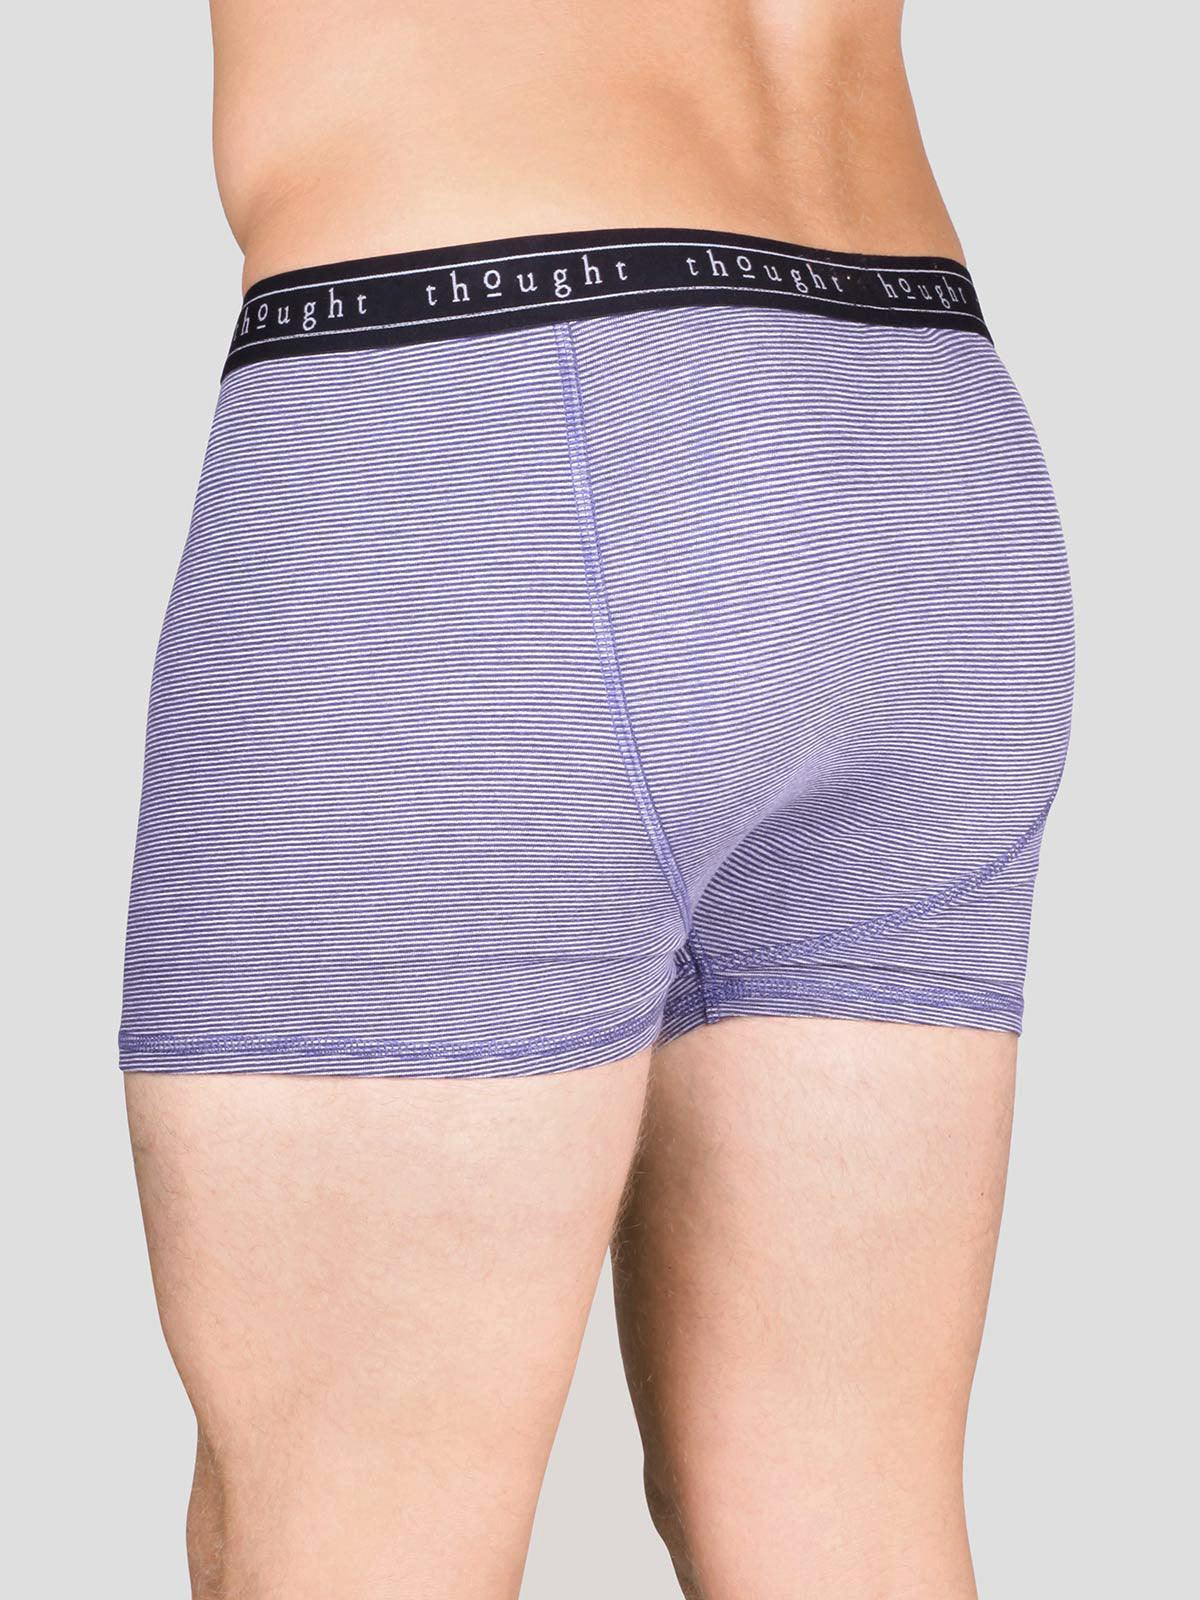 Michael Striped Bamboo Jersey Boxers - Thought Clothing UK